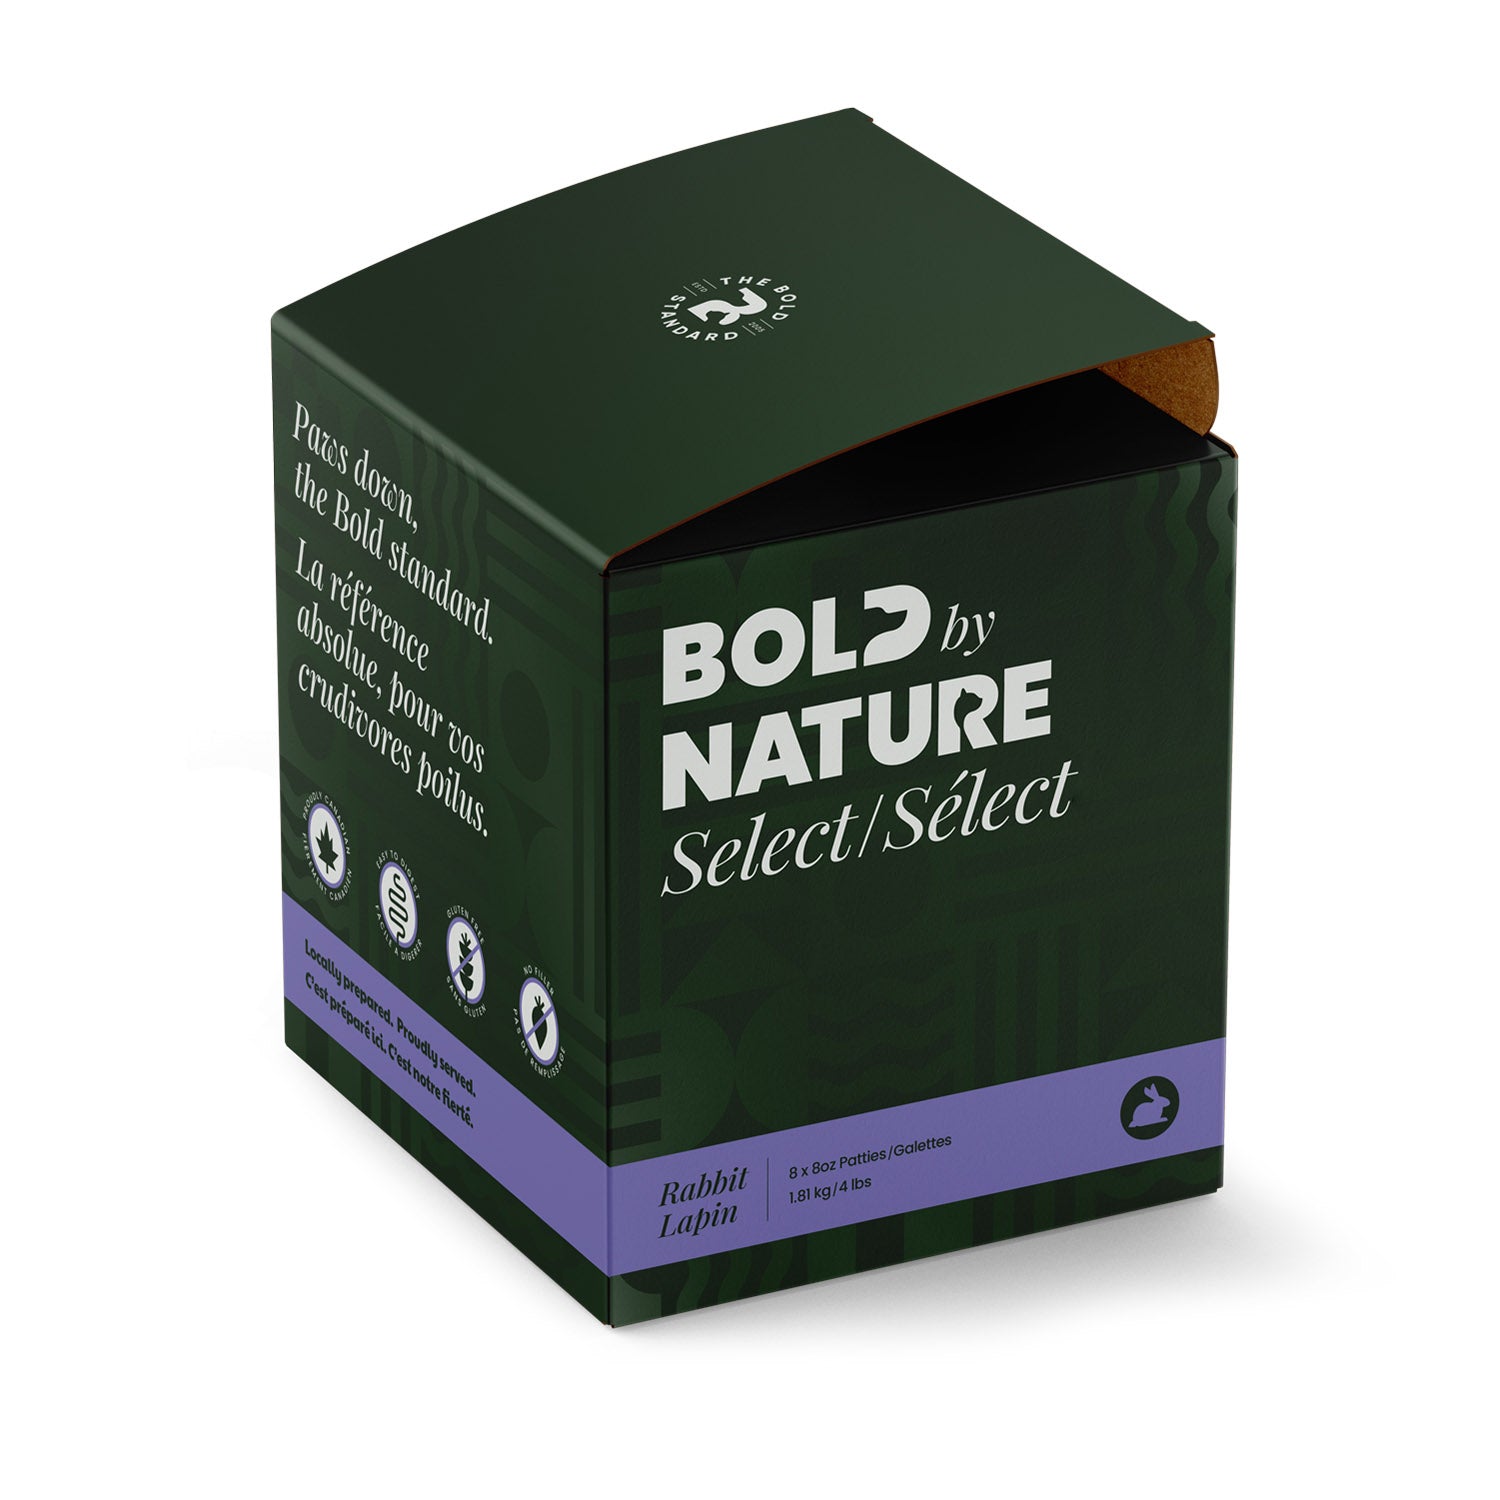 Bold by Nature (Bold Raw) - Select Rabbit - Frozen Product